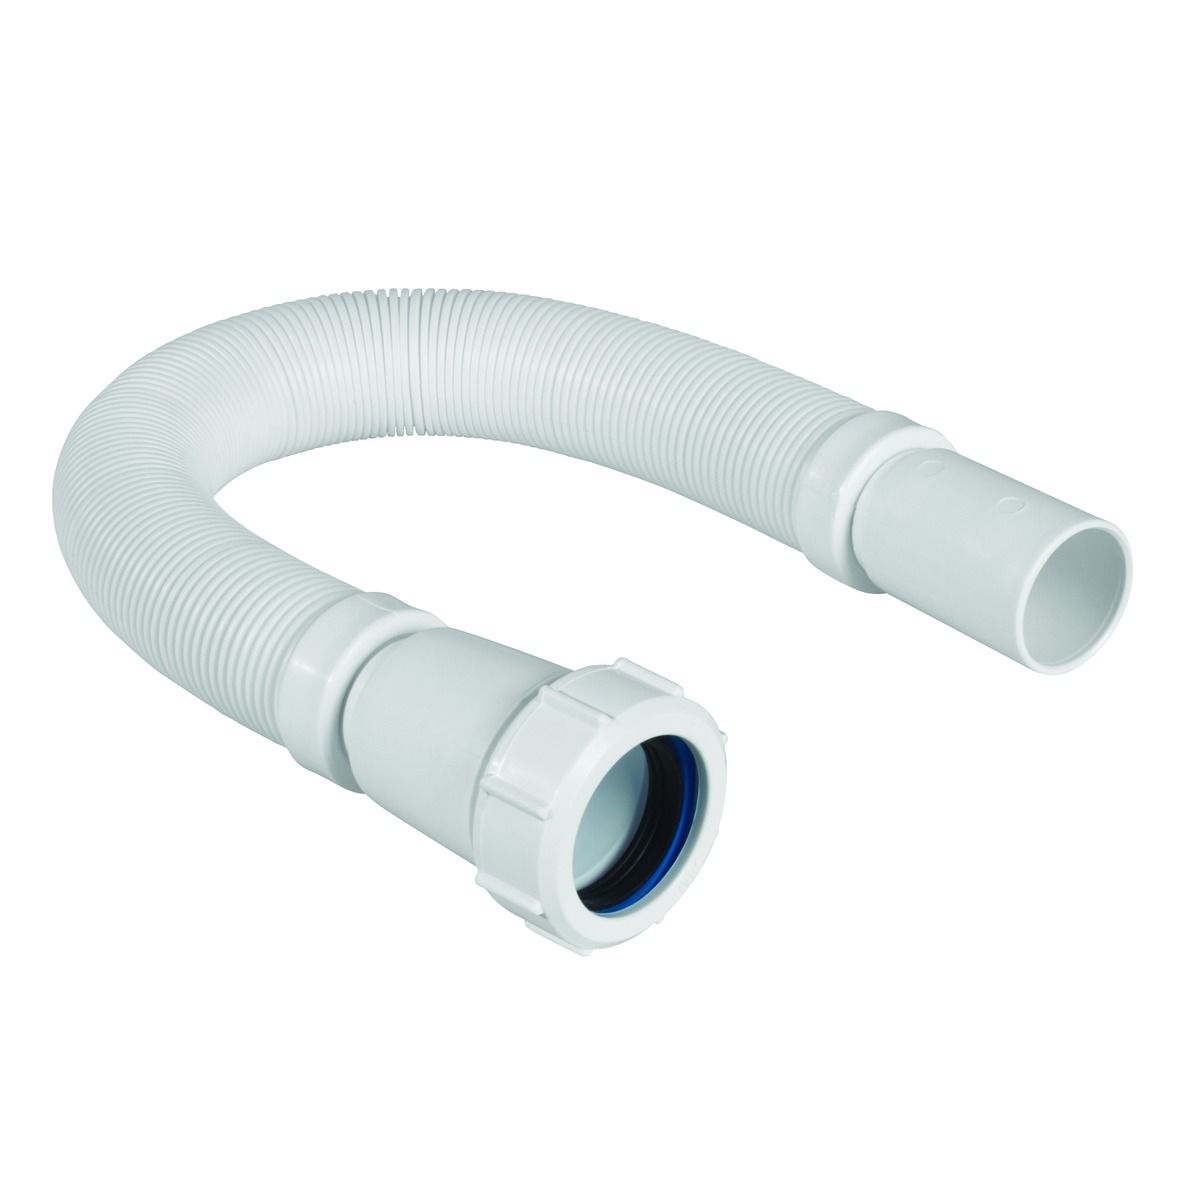 Image of Primaflow Flexible Waste Connector - 32mm